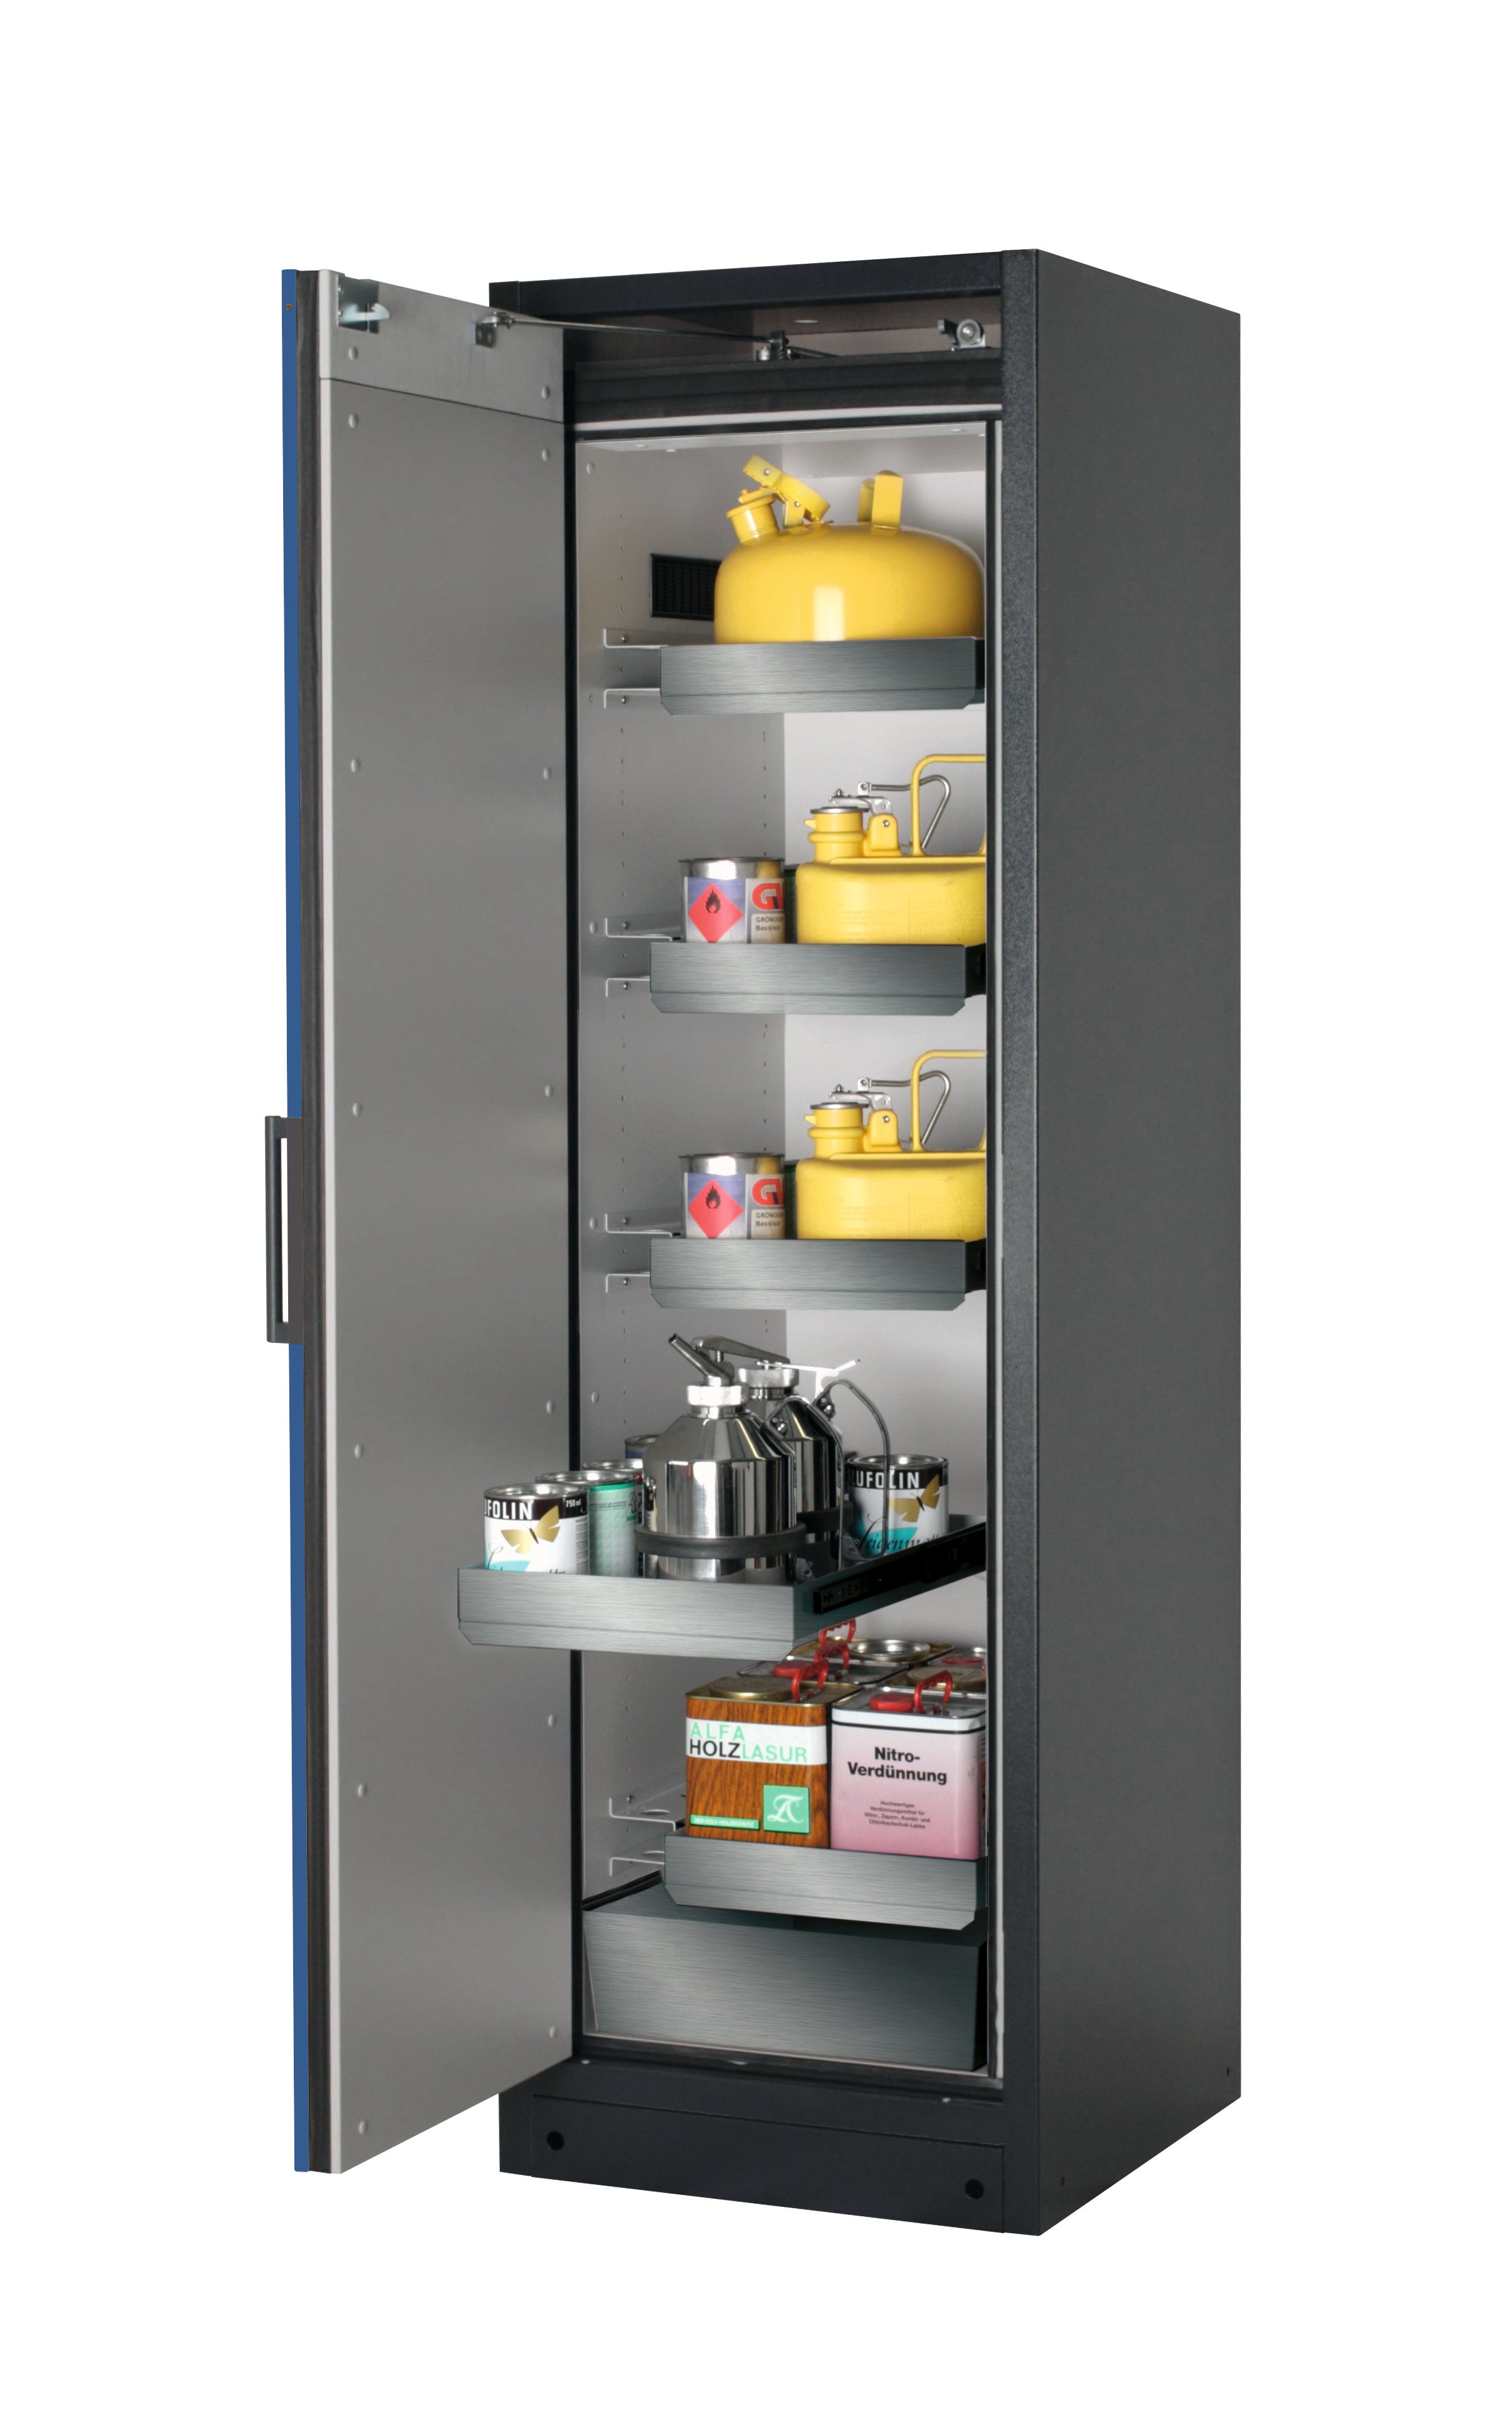 Type 90 safety storage cabinet Q-CLASSIC-90 model Q90.195.060 in gentian blue RAL 5010 with 4x drawer (standard) (stainless steel 1.4301),